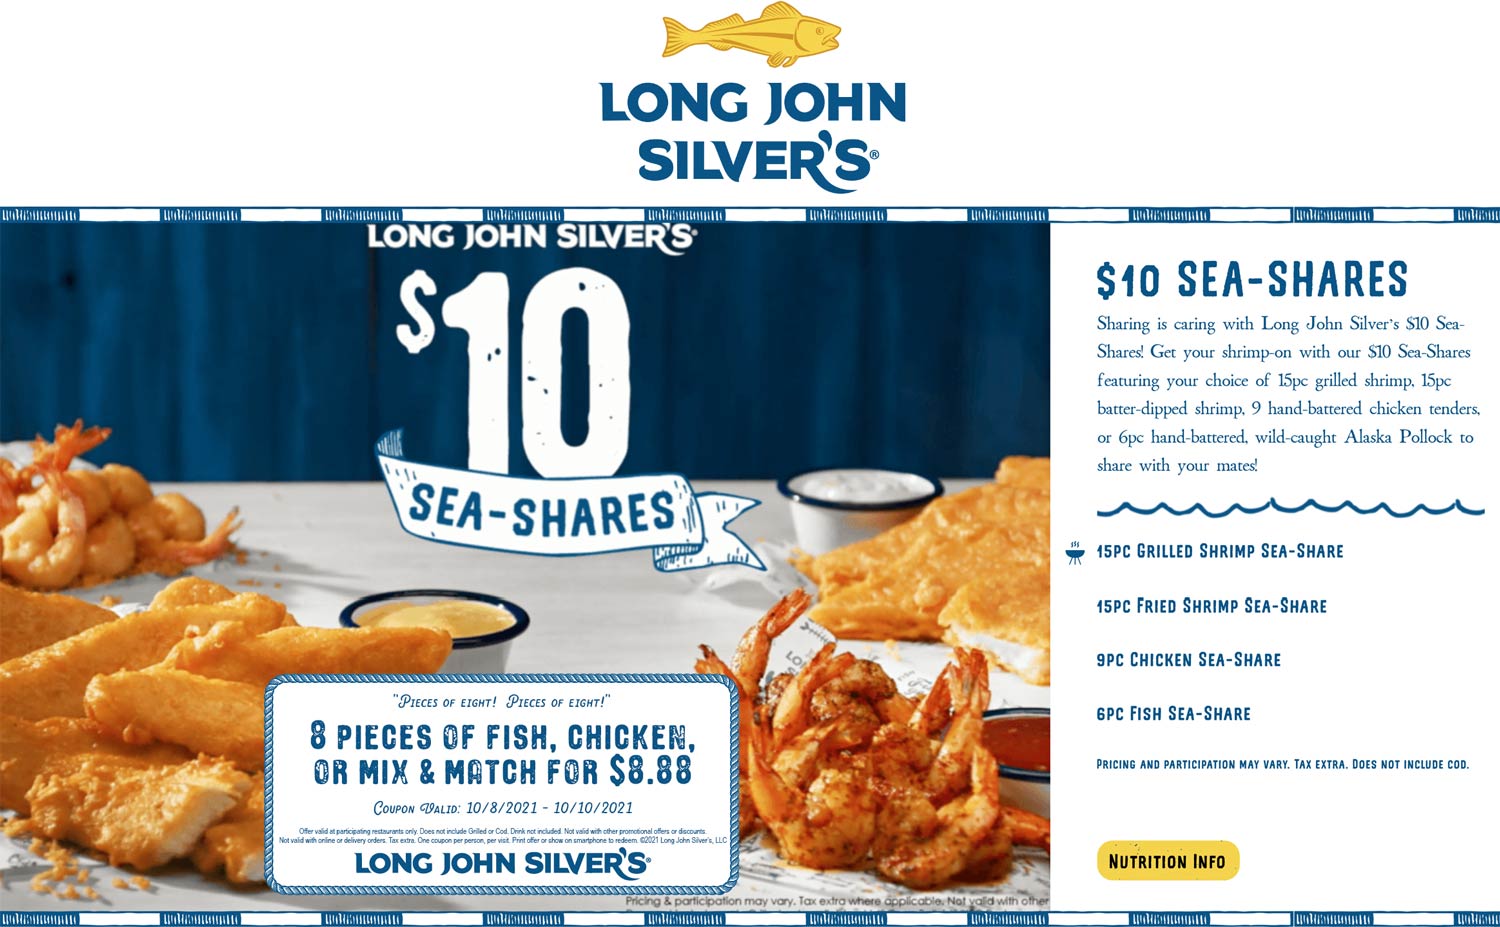 Long John Silvers restaurants Coupon  8pc mix & match fish and chicken = $8.88 & more at Long John Silvers #longjohnsilvers 